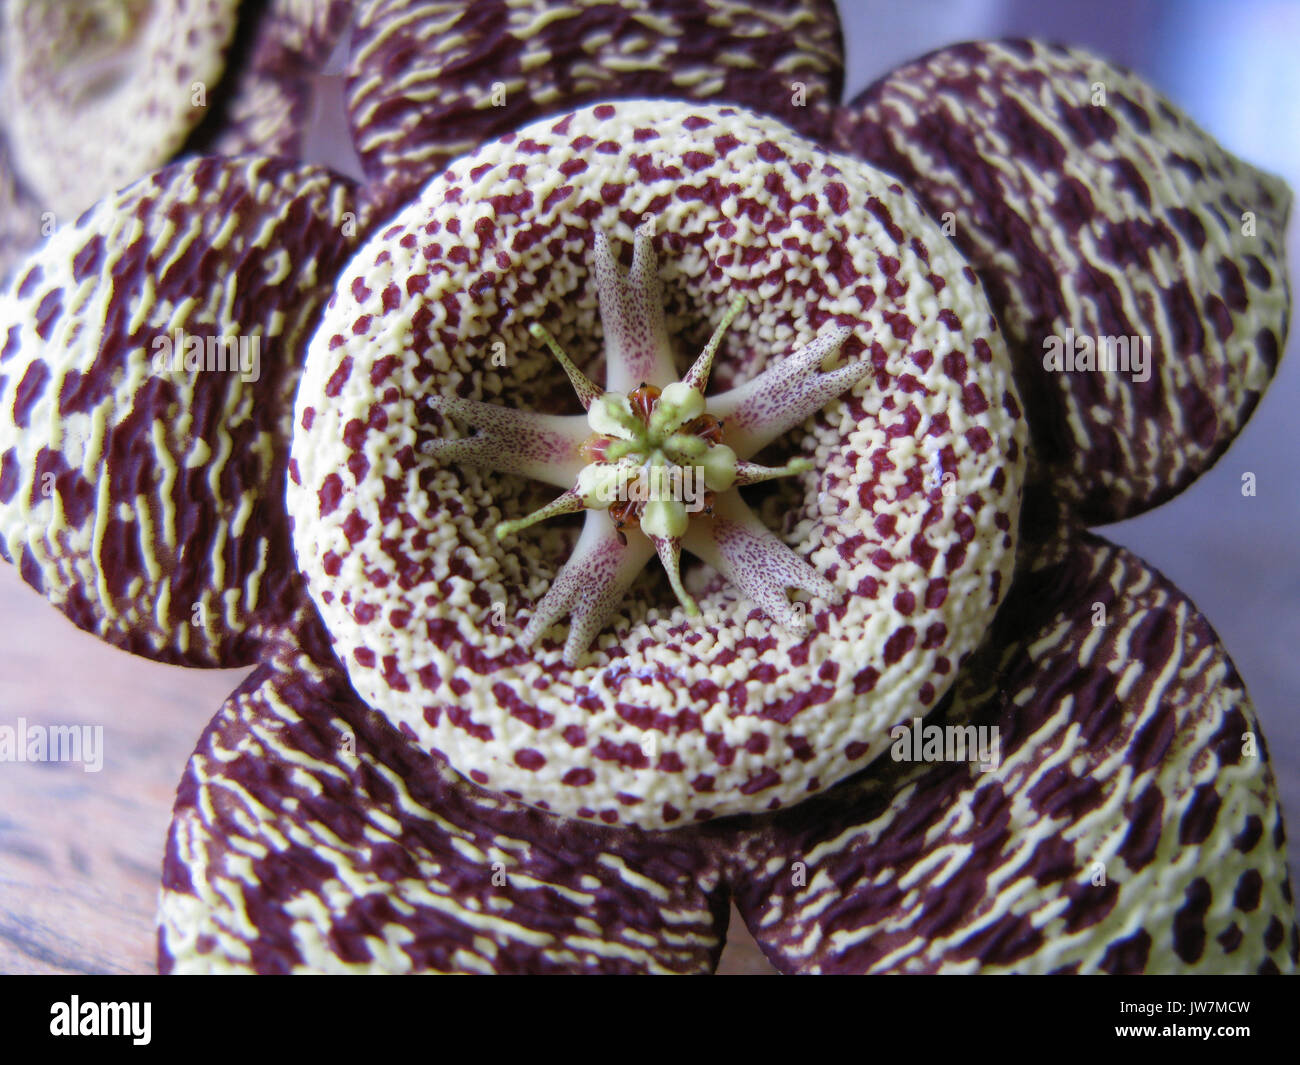 Orbea Variegata has a beautiful star shaped flower that stinks of rotten meat to attract flies. Stock Photo